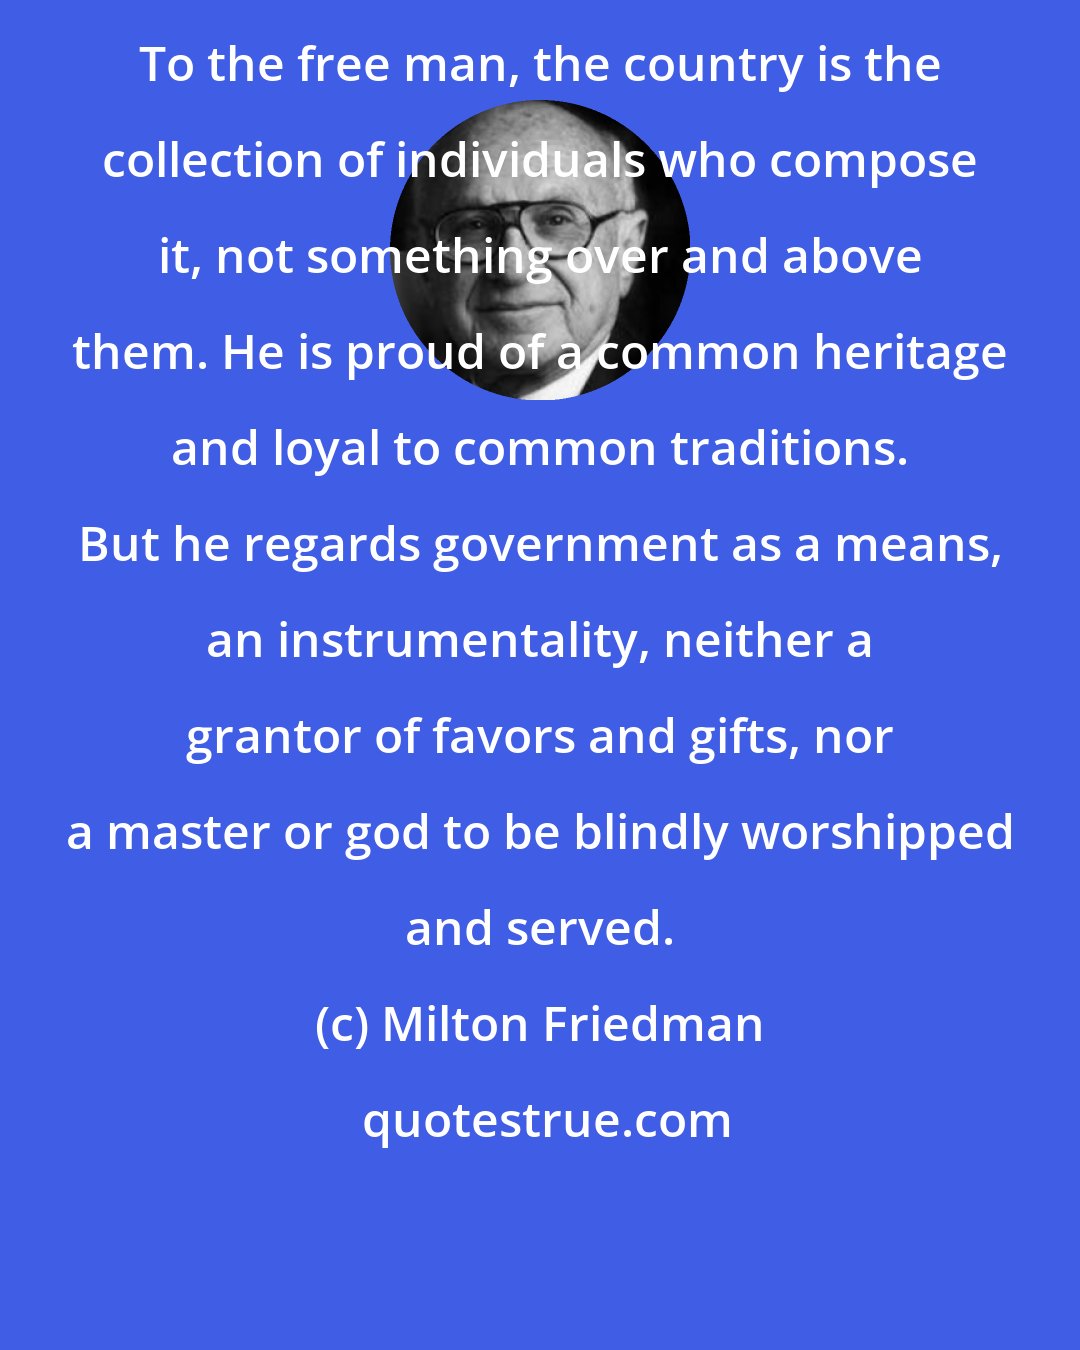 Milton Friedman: To the free man, the country is the collection of individuals who compose it, not something over and above them. He is proud of a common heritage and loyal to common traditions. But he regards government as a means, an instrumentality, neither a grantor of favors and gifts, nor a master or god to be blindly worshipped and served.